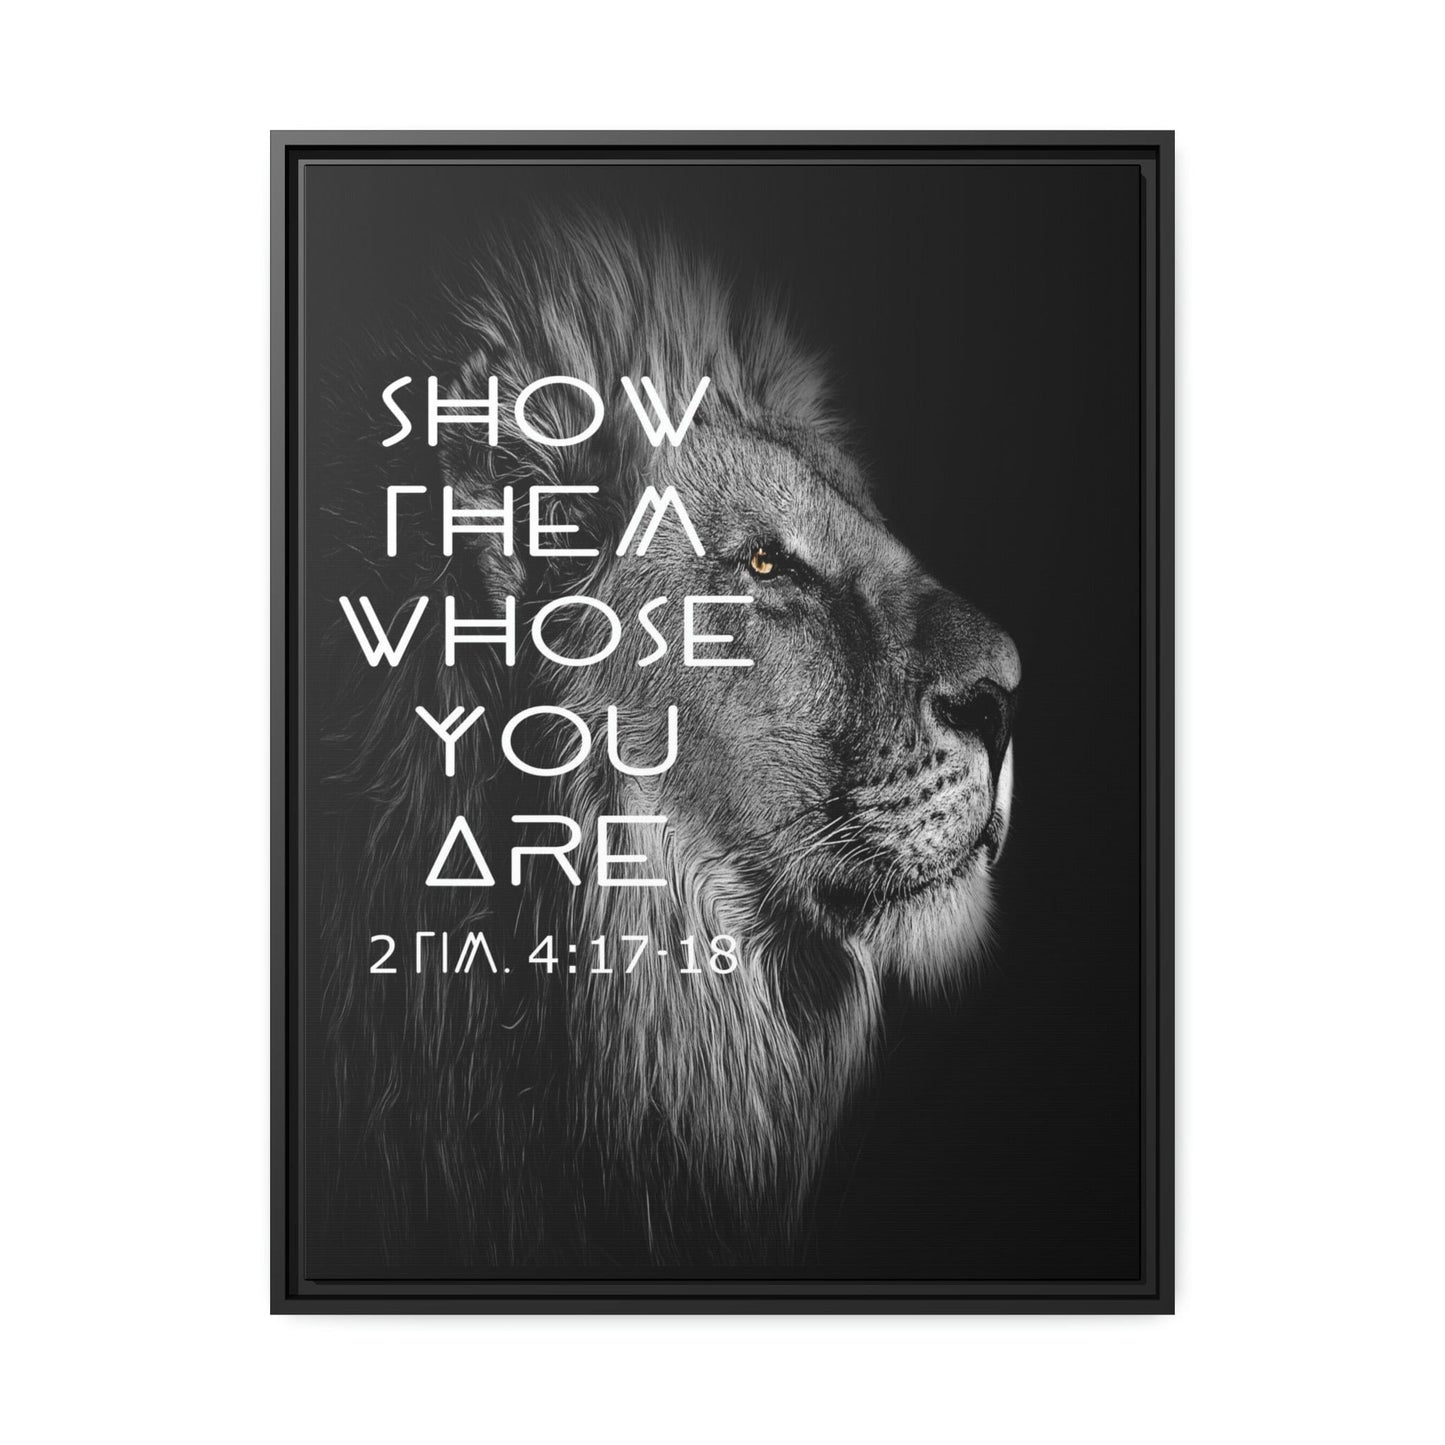 Printify Canvas 24" x 32" (Vertical) / Black / 1.25" Show Them Whose You Are - 2 Tim 4:17-18 Christian Canvas Wall Art